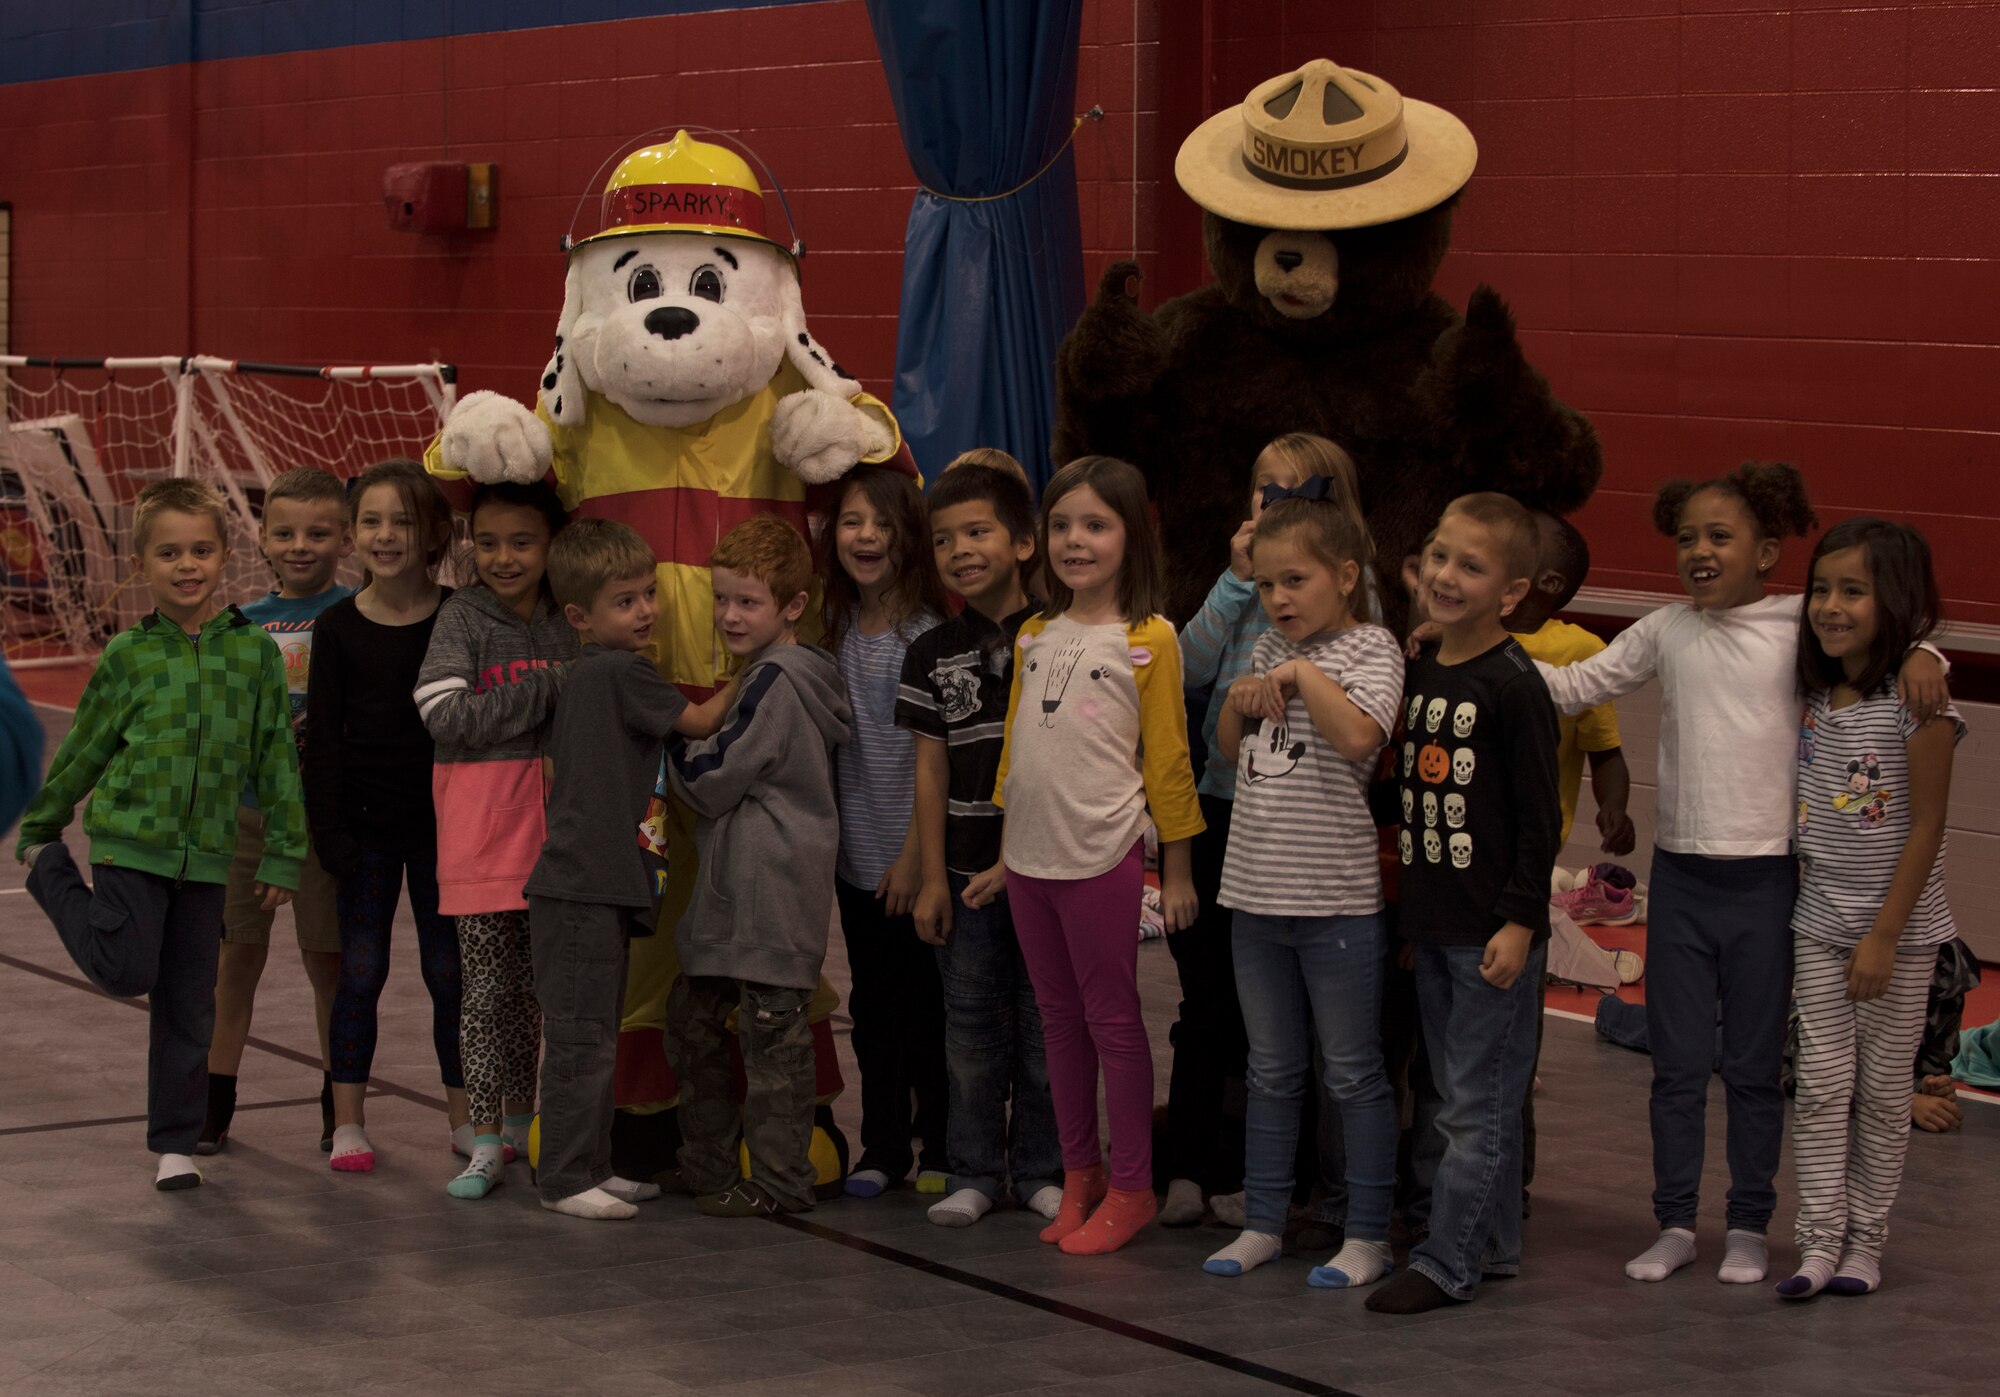 Sparky the Dog and Smokey the Bear, mascots for the Fire and Emergency Services Team at Whiteman Air Force Base, Missouri, pose for a photo with first graders from Whiteman Elementary on October 10, 2019. The 2019 Fire Prevention Week campaign theme is "Not Every Hero Wears a Cape. Plan and Practice Your Escape". (U.S. Air Force photo by Staff Sgt. Kayla White)